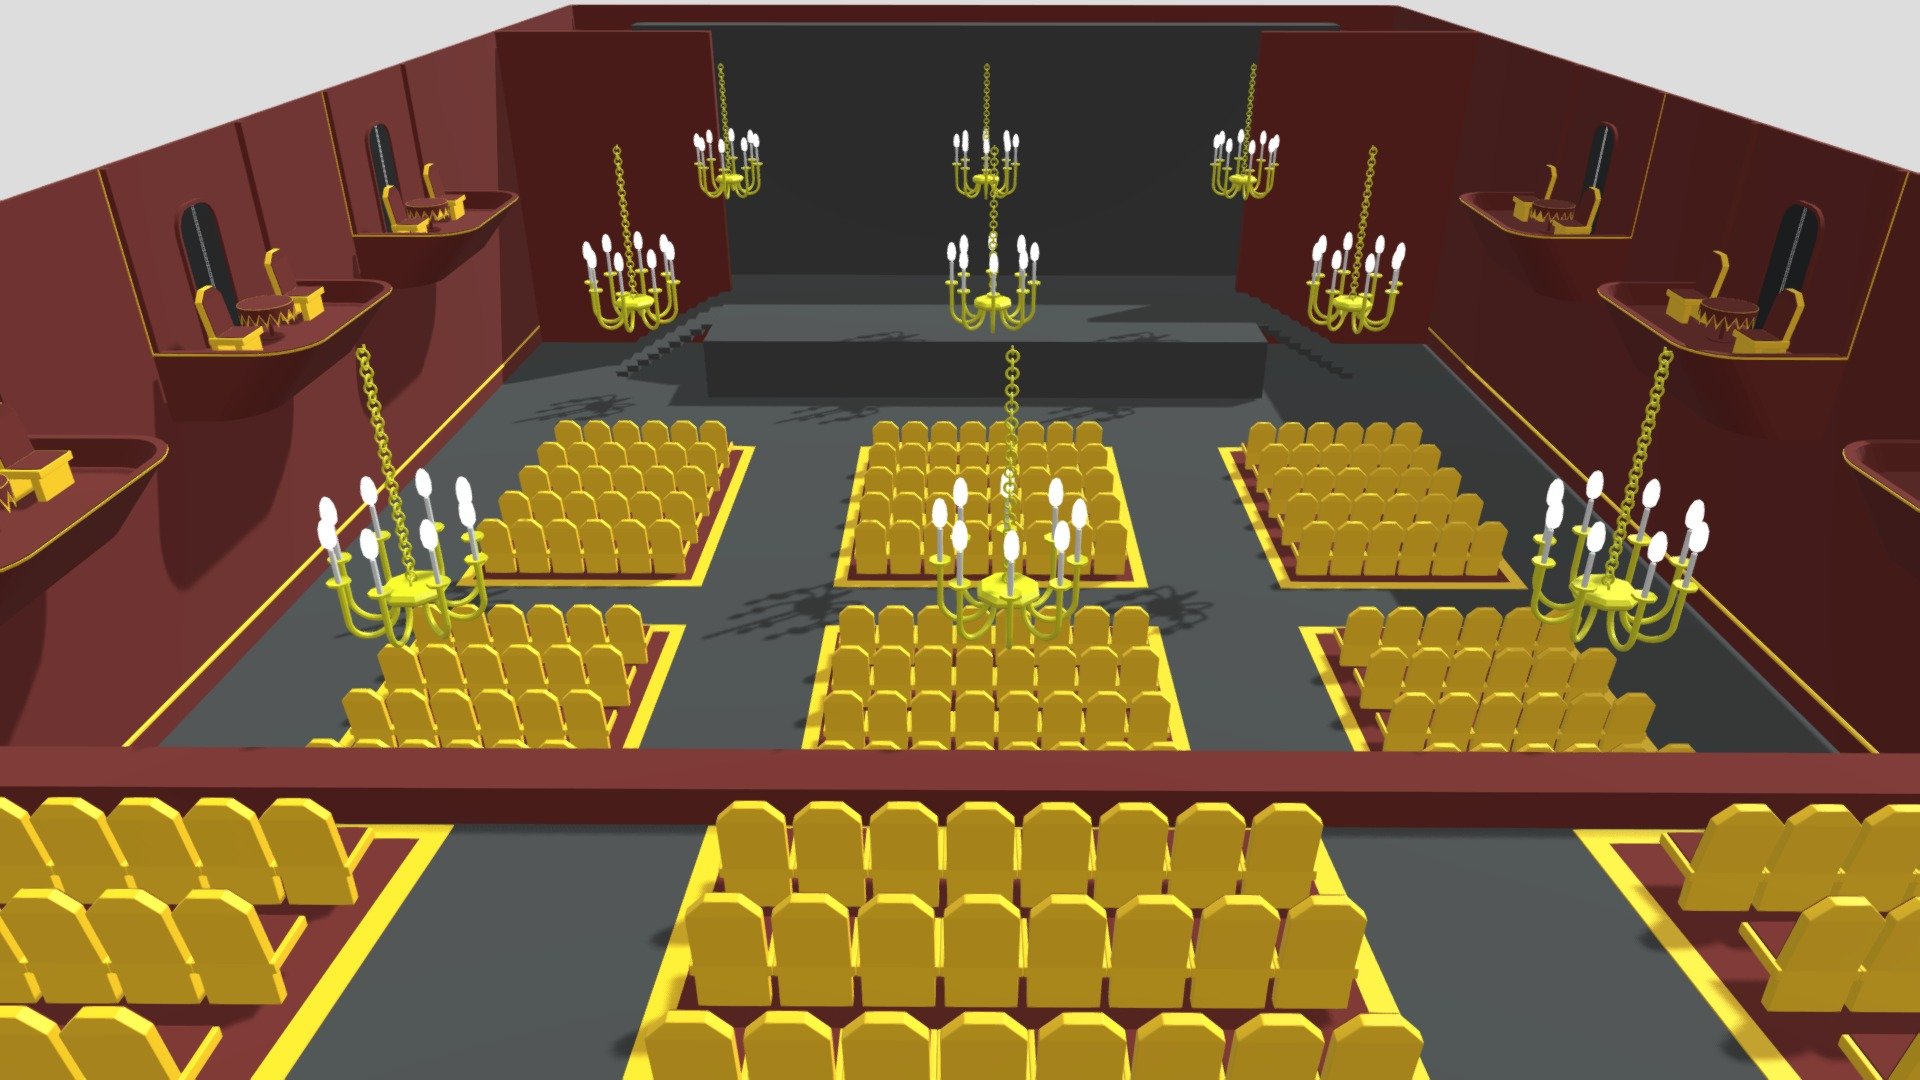 -Theater Interior.

-This product contains 125 models.

-This product was created in Blender 2.8.

-Total vertices 203,710. Total polygons 203,356;

-Formats: . blend . fbx . obj, c4d,dae,fbx,unity.

-Thank you 3d model